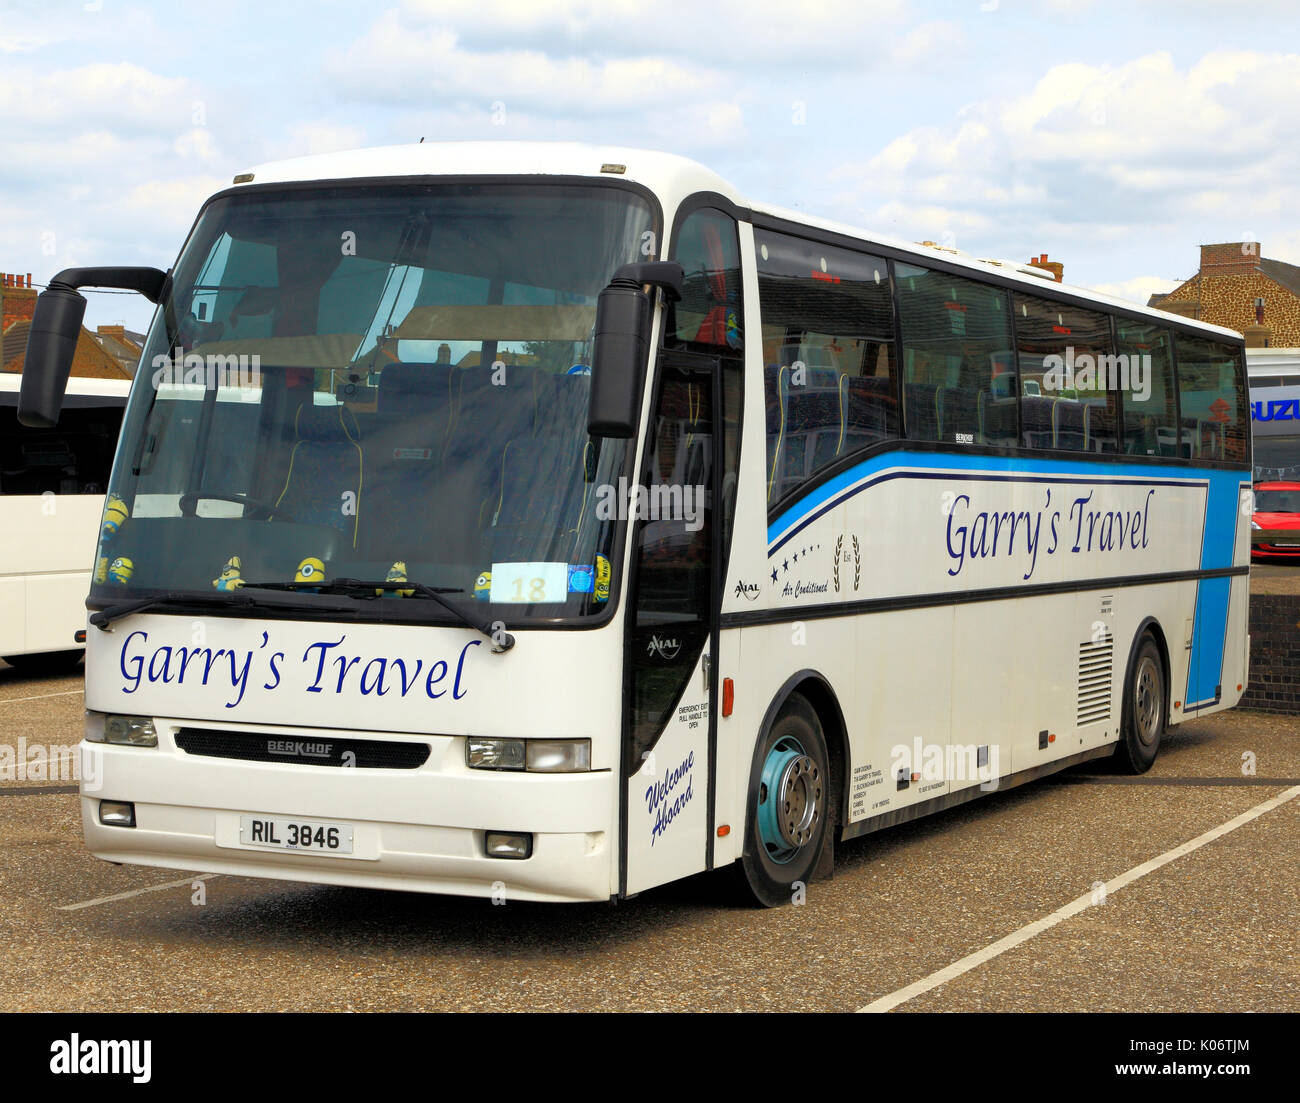 Garry's Travel, coach, coaches, day trip, trips, excursion, excursions, holidays, travel, company, companies, transport, England, UK Stock Photo